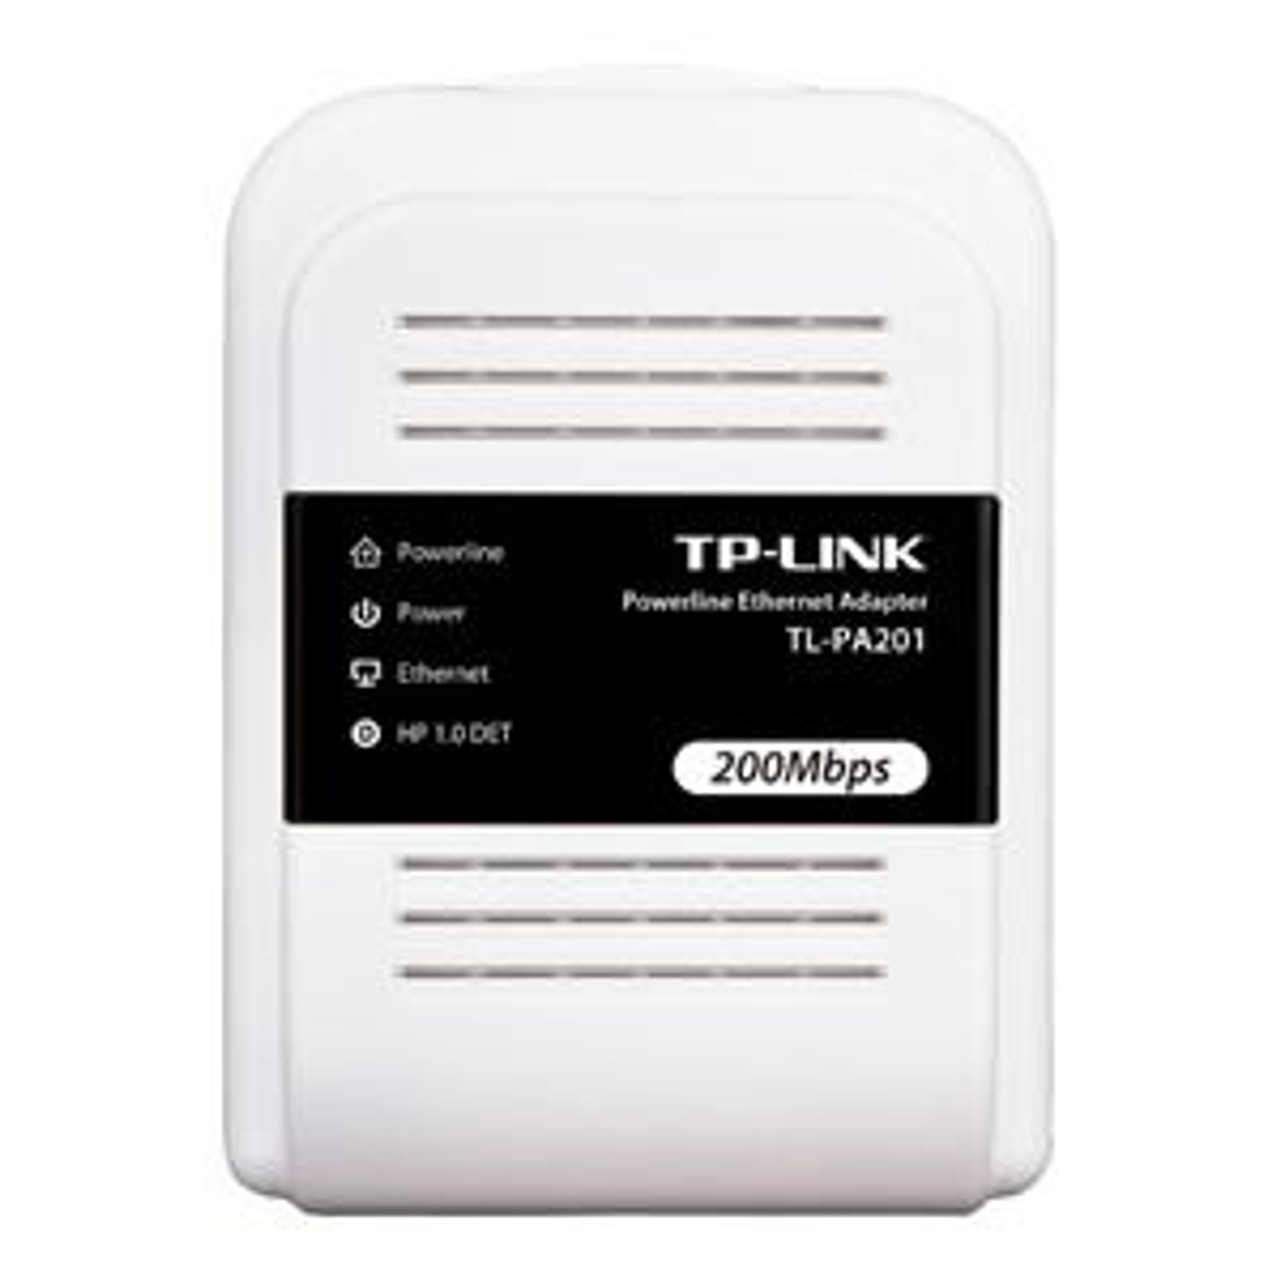 TL-PA201 TP-LINK Powerline Network Adapter 1 x 10/100Base-TX Network 1 x Powerline 200 Mbps